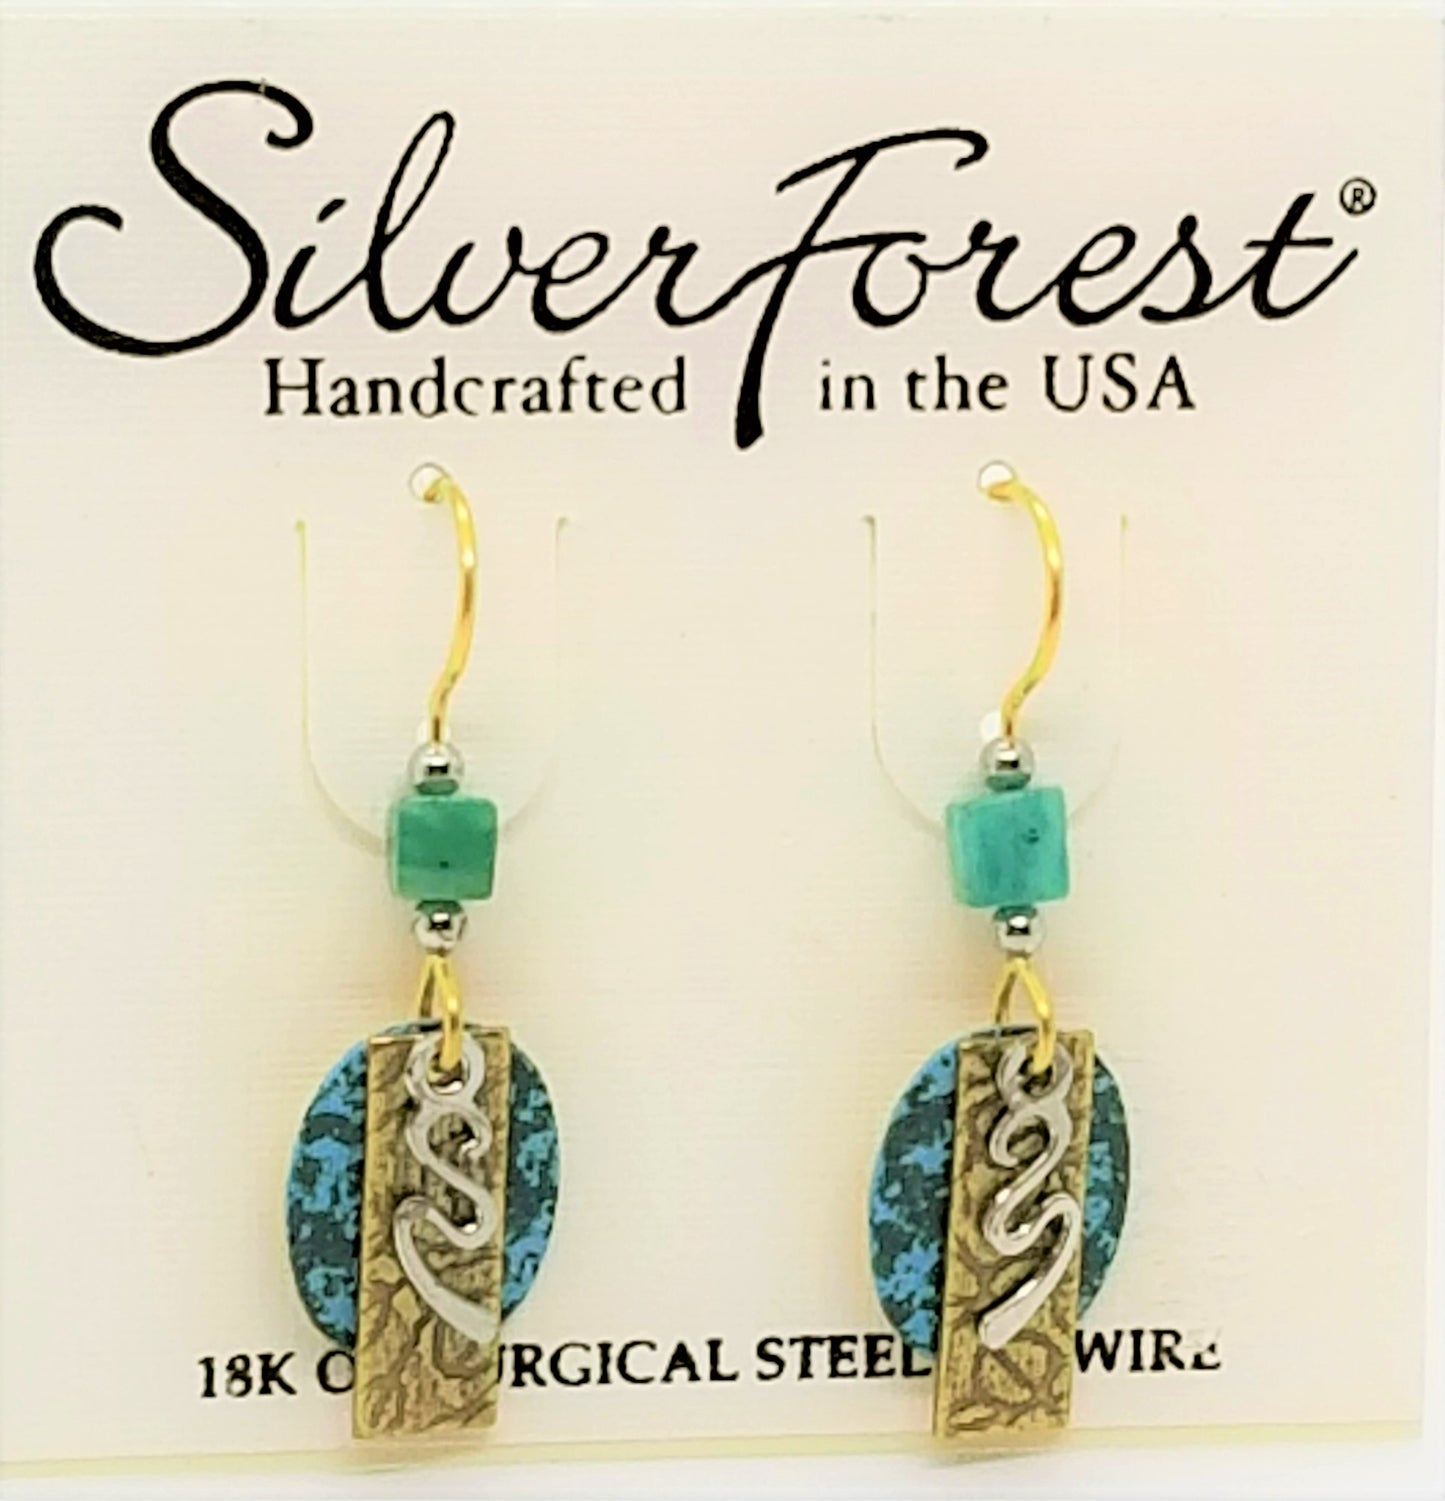 Silver forest 18kt gold plated green earrings